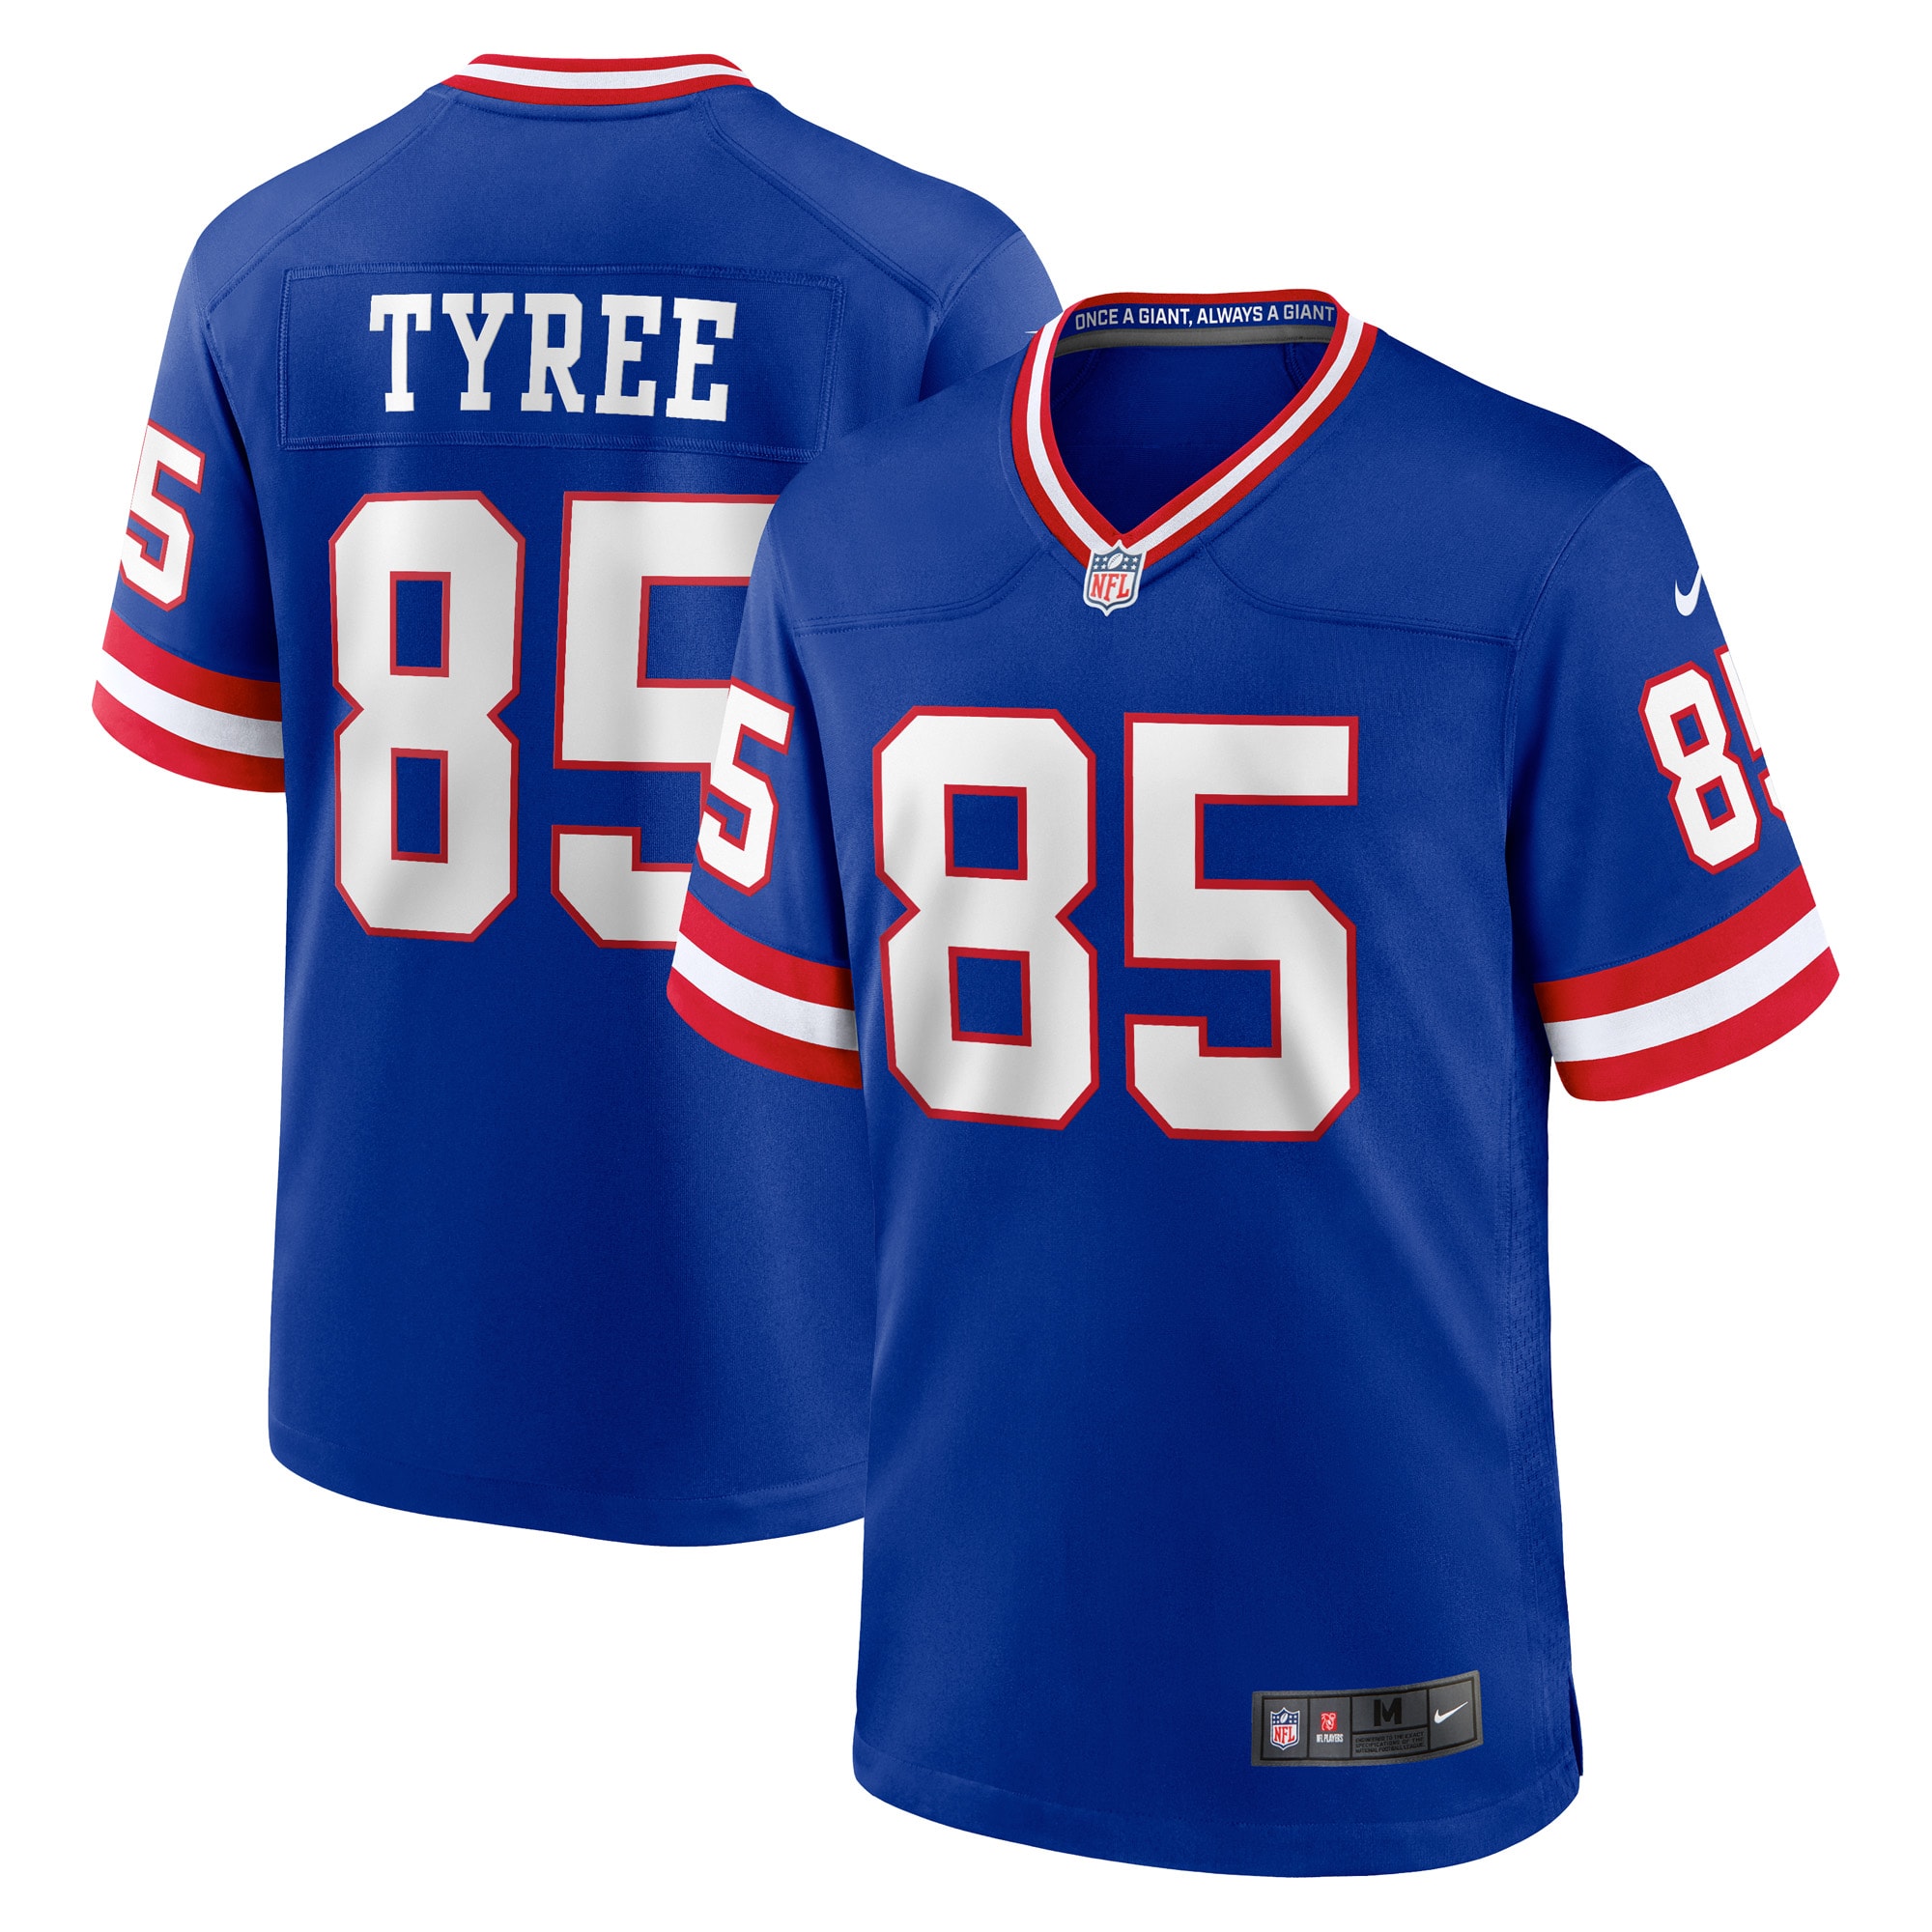 Men's New York Giants Jerseys Royal David Tyree Classic Retired Player Game Style